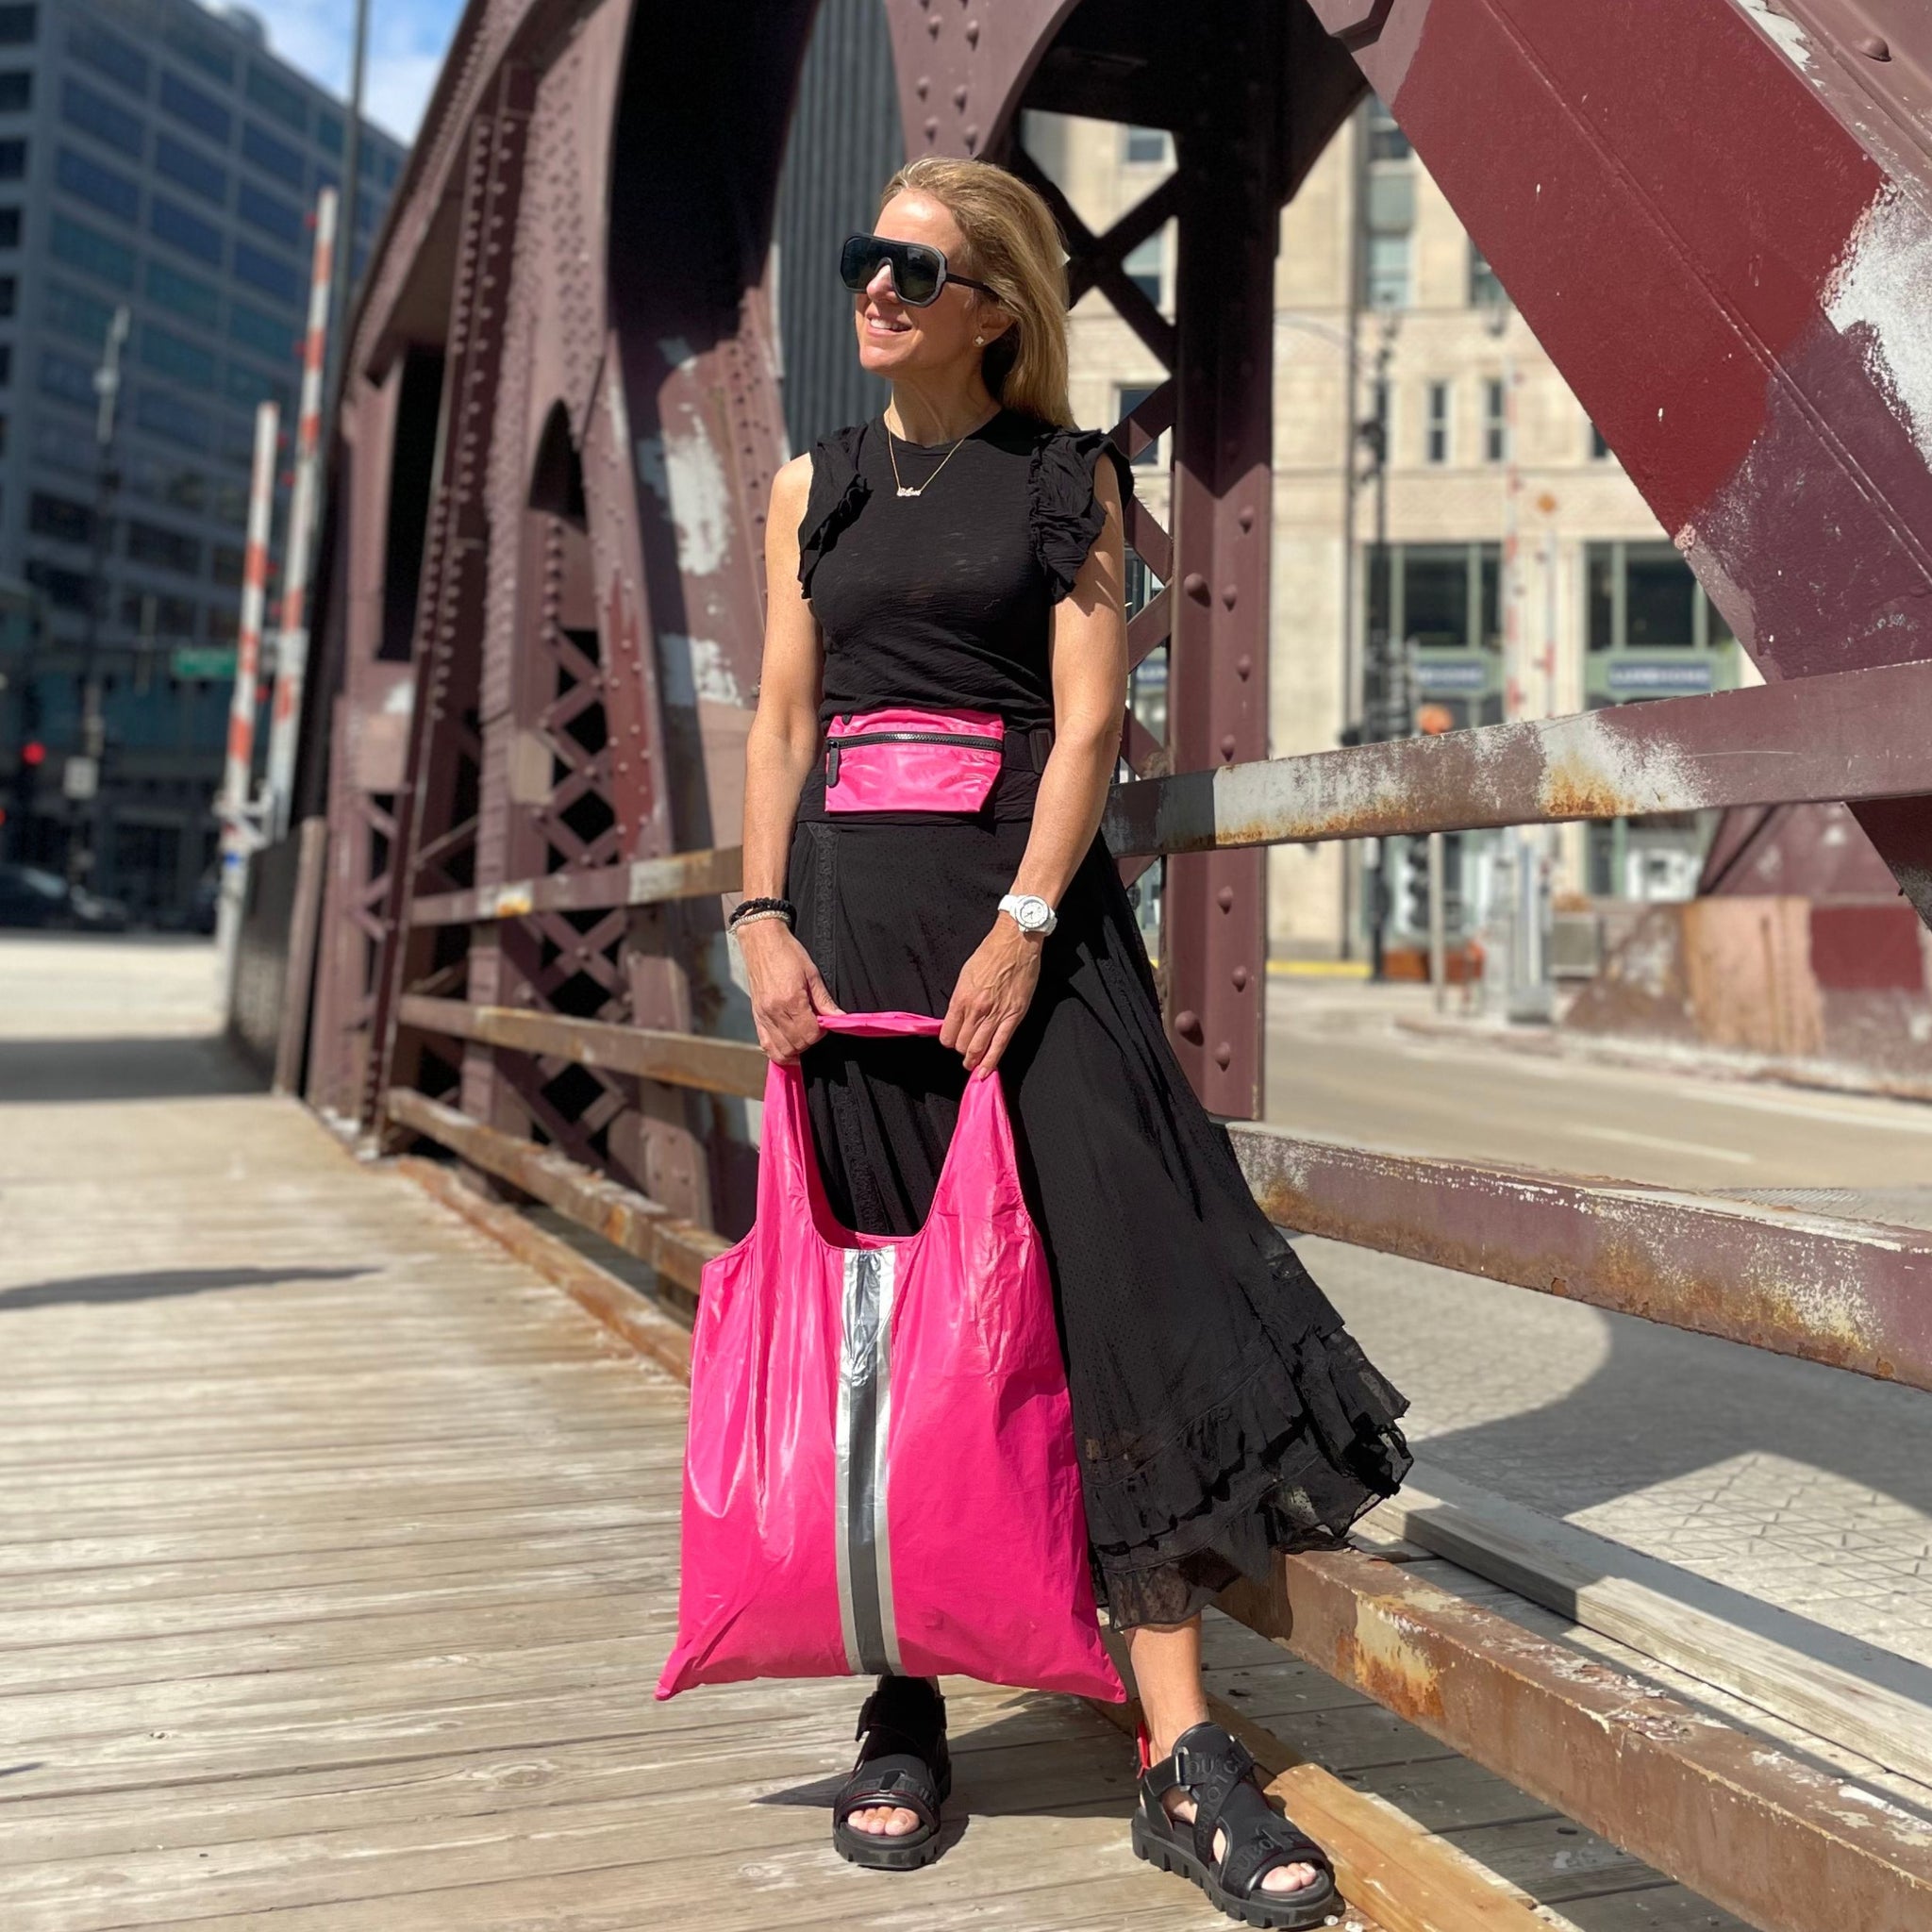 Woman wearing hot pink fanny pack and holding hot pink tote bag